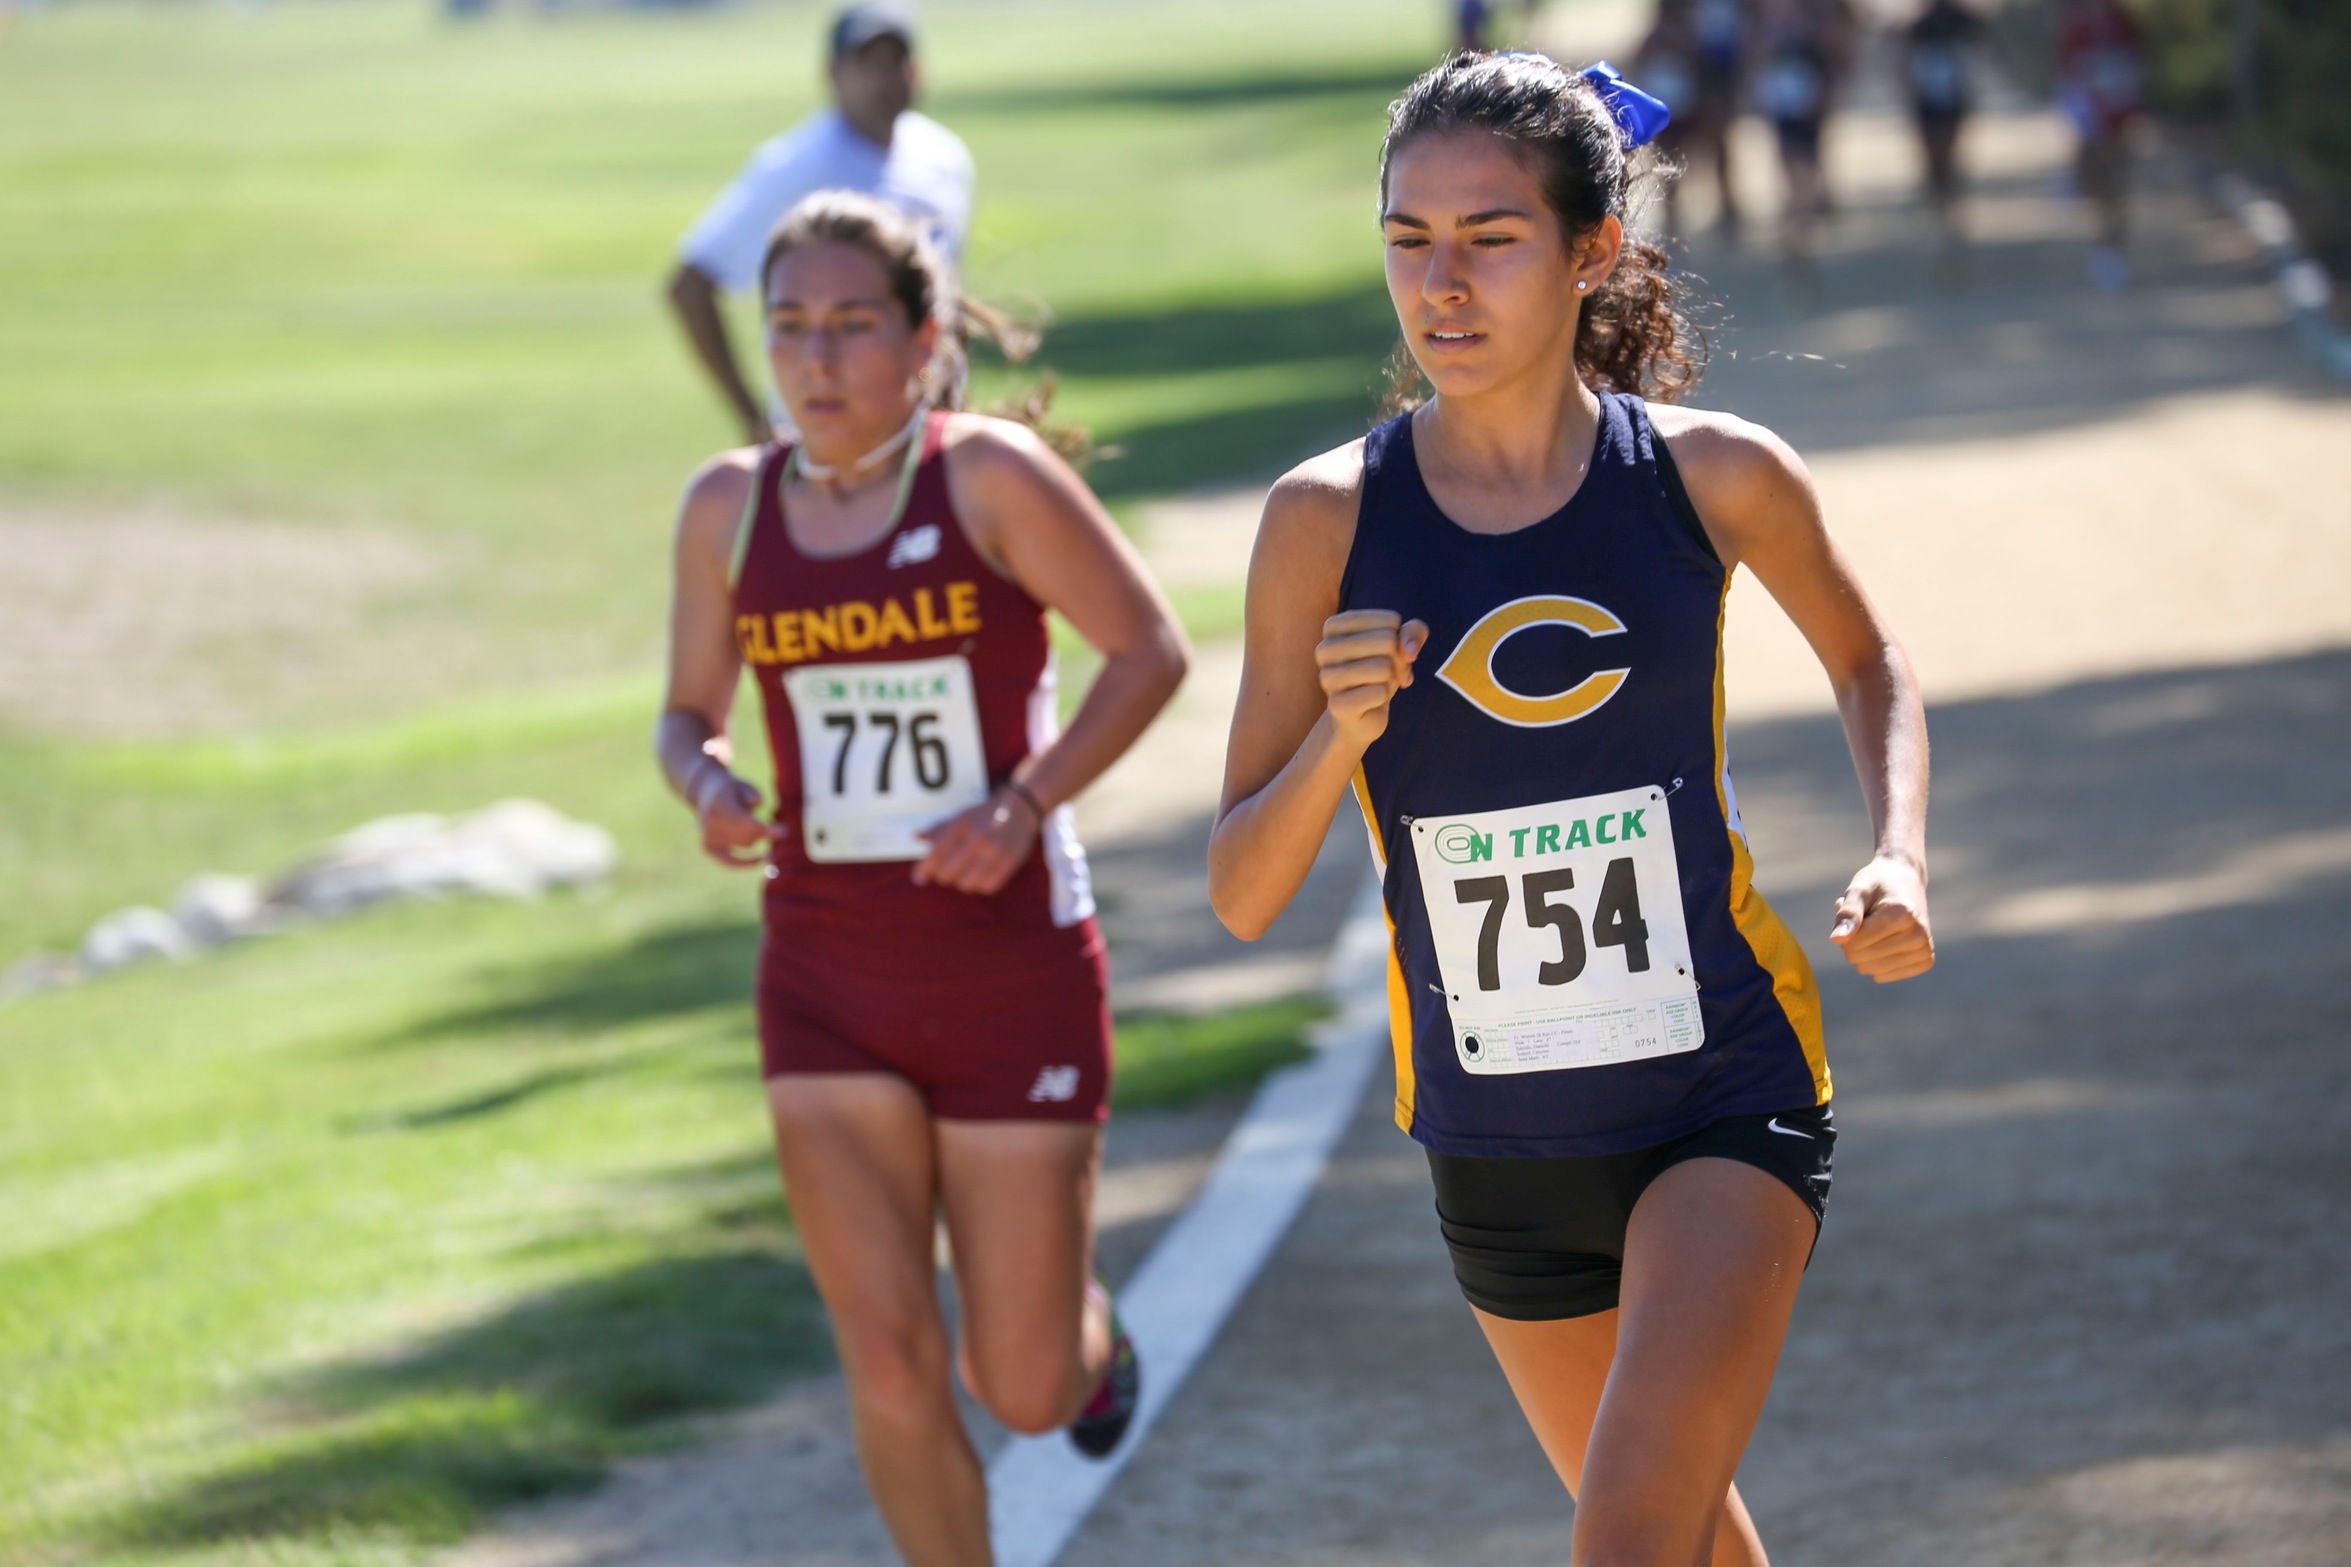 College of the Canyons freshman Danielle Salcedo, who graduated Saugus High School, has been named the California Community College Sports Information Association (CCCSIA) Female State Athlete of the Month for September. Salcedo has enjoyed a tremendous start to her collegiate cross country career, having won the 5K women’s race in every community college event she has competed in this season. — Jesse Muñoz/COC Sports Information Director 